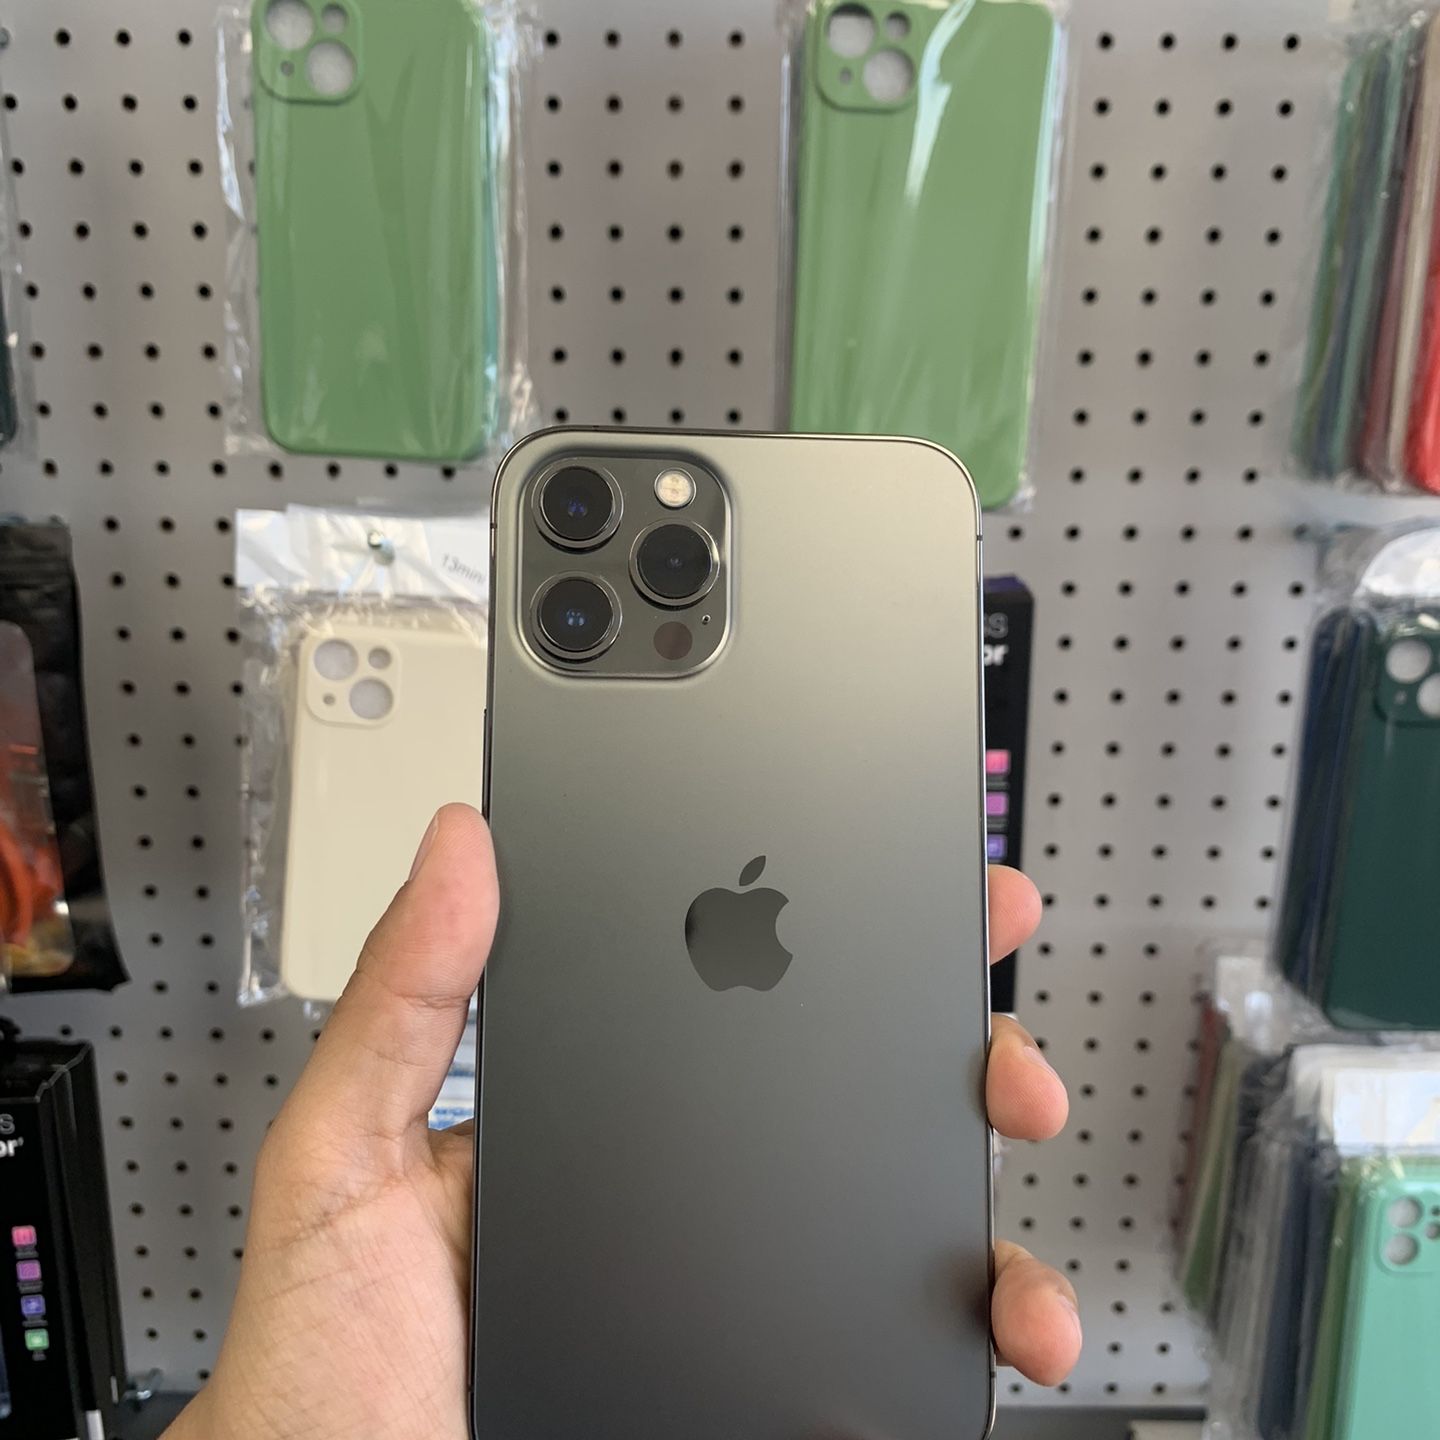 ☑️📱 iPhone 12 Pro Max 256 GB Unlocked BH75% 🔋 Case And Headphones For Free 🤍👌🏻